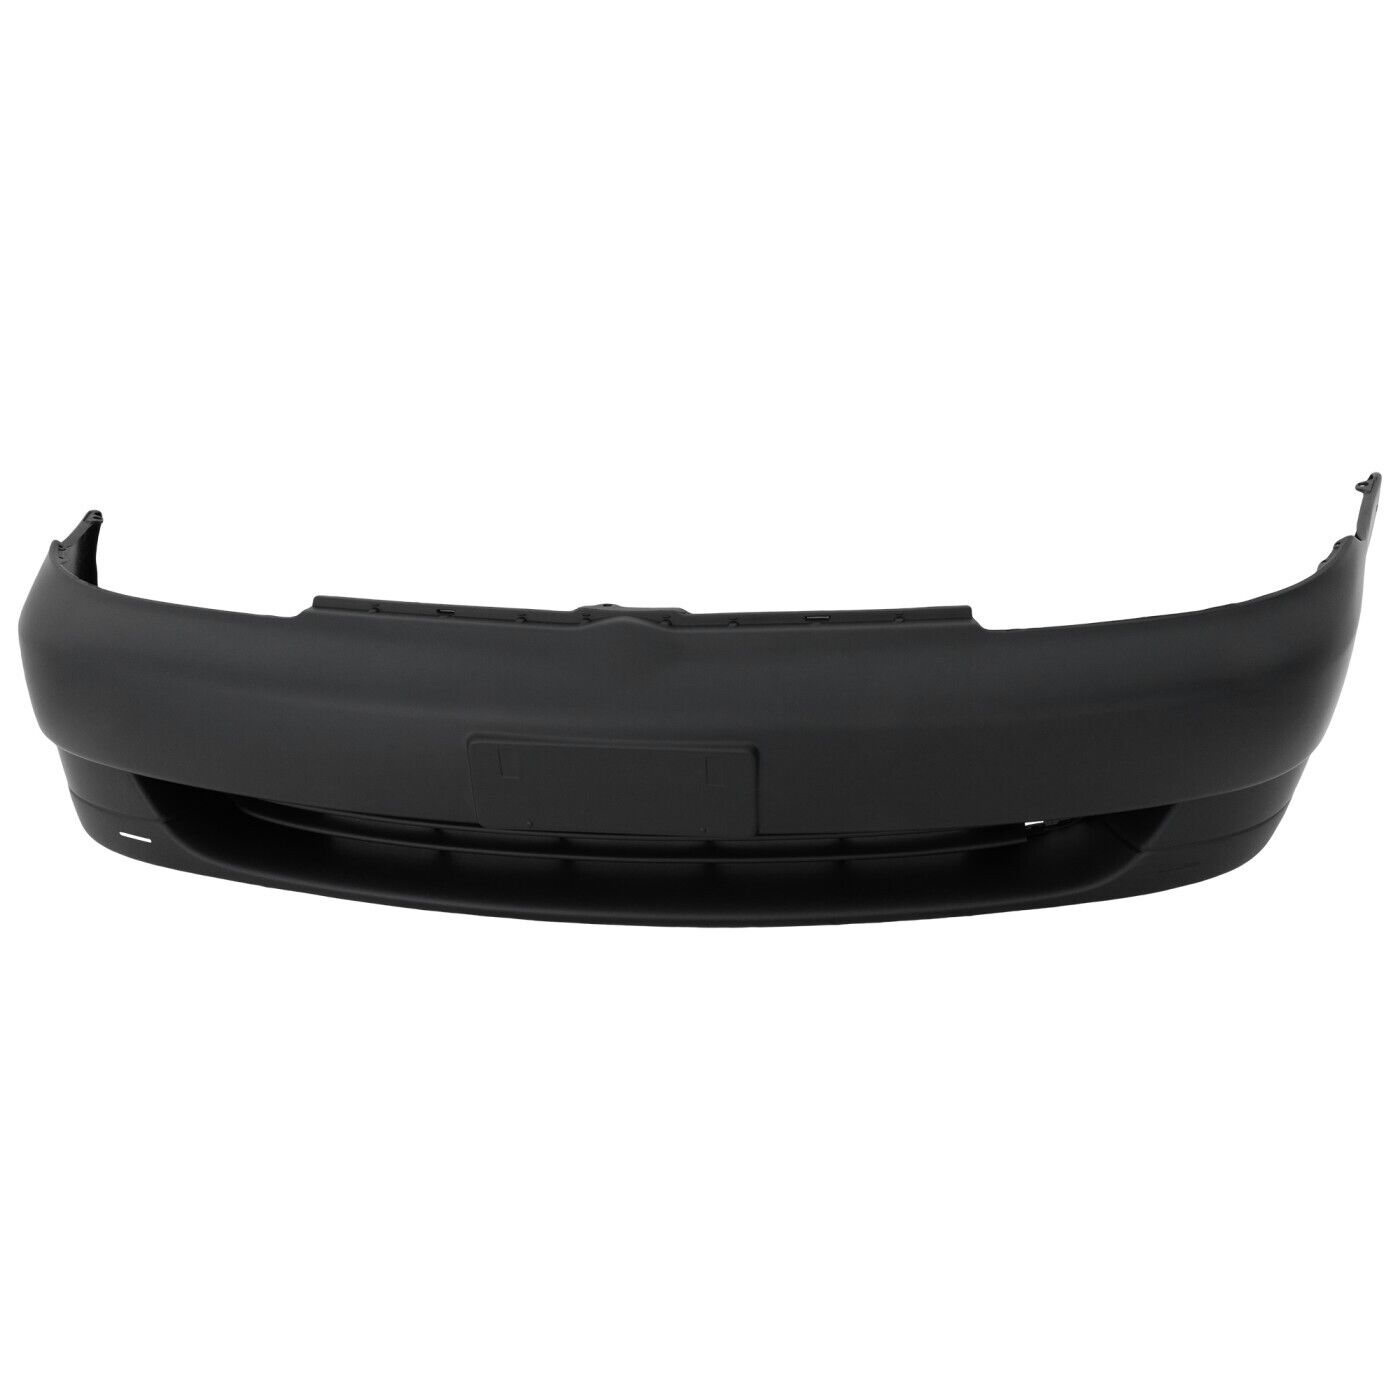 Front Bumper Cover For 2000-2002 Toyota Echo w/ fog lamp holes Primed